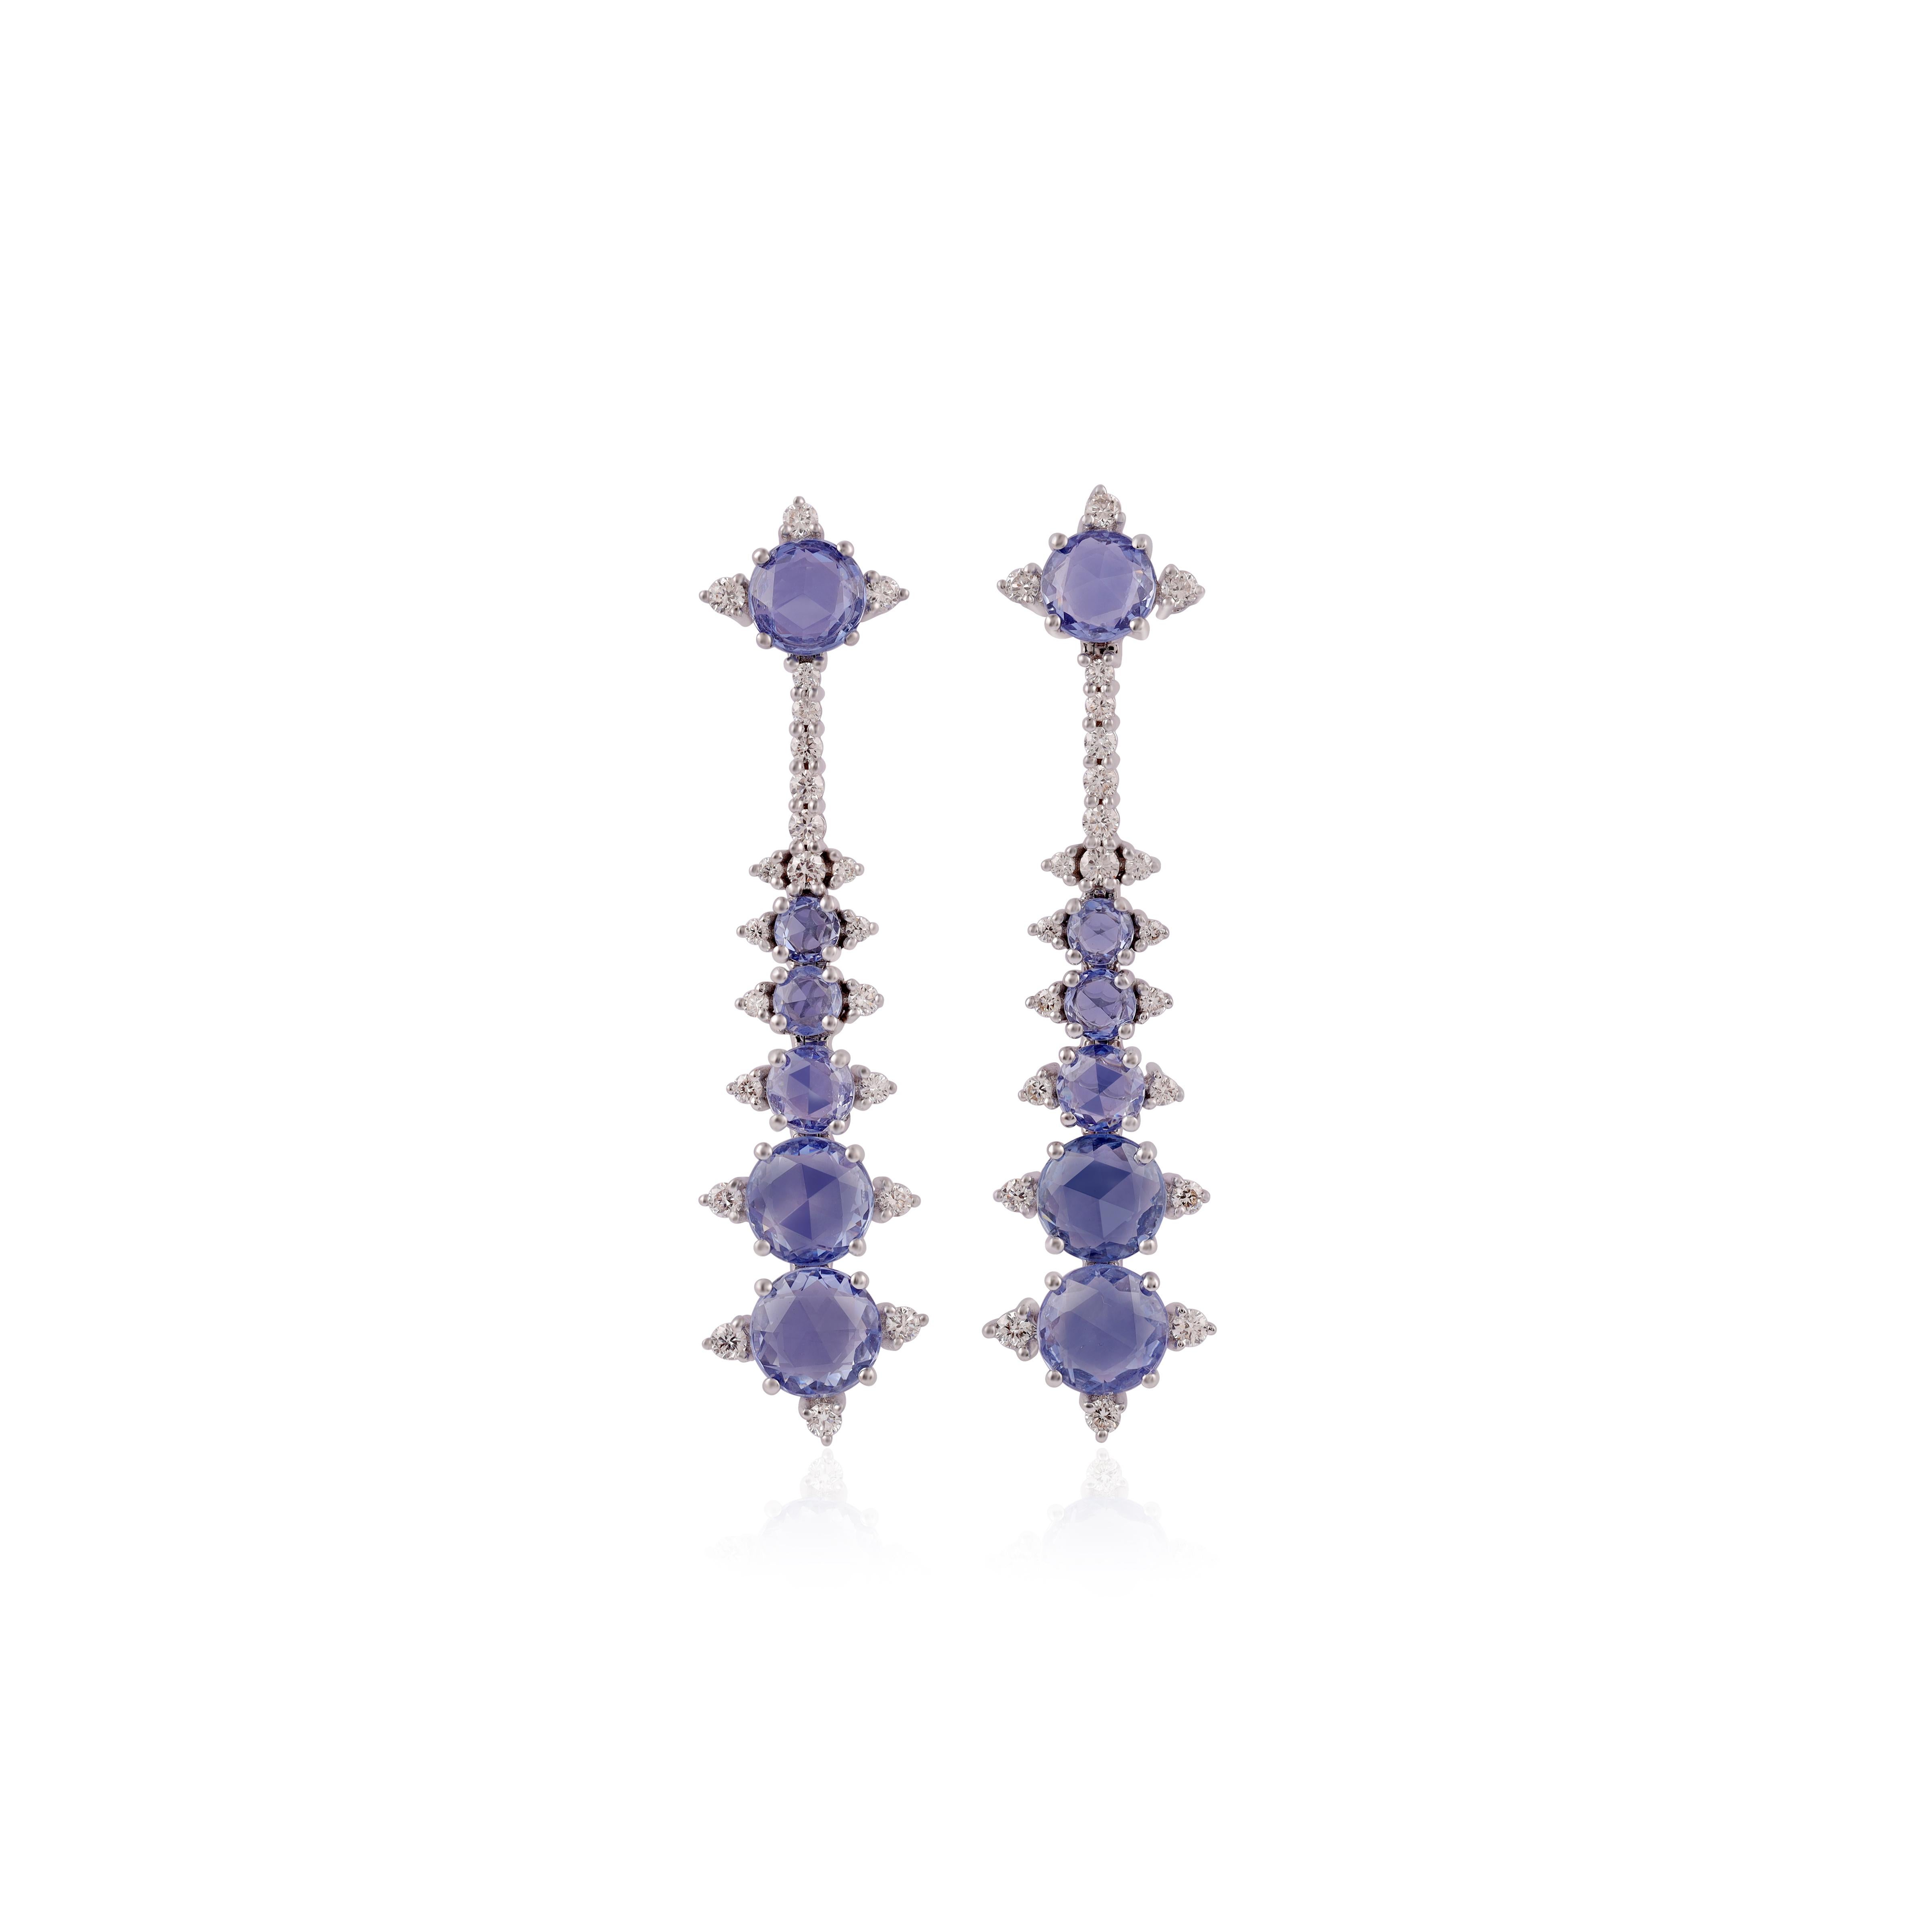 Magnificent Blue Sapphire Earring



4.16 Carat Clear Blue Sapphire and Diamond Earring in 18 Karat  White Gold.



Clear Blue Sapphire -4.16 Carat
Diamond - 0.45 Carat
Gold - 5.4 gm



Custom Services
Available in Different gem stones.
Request